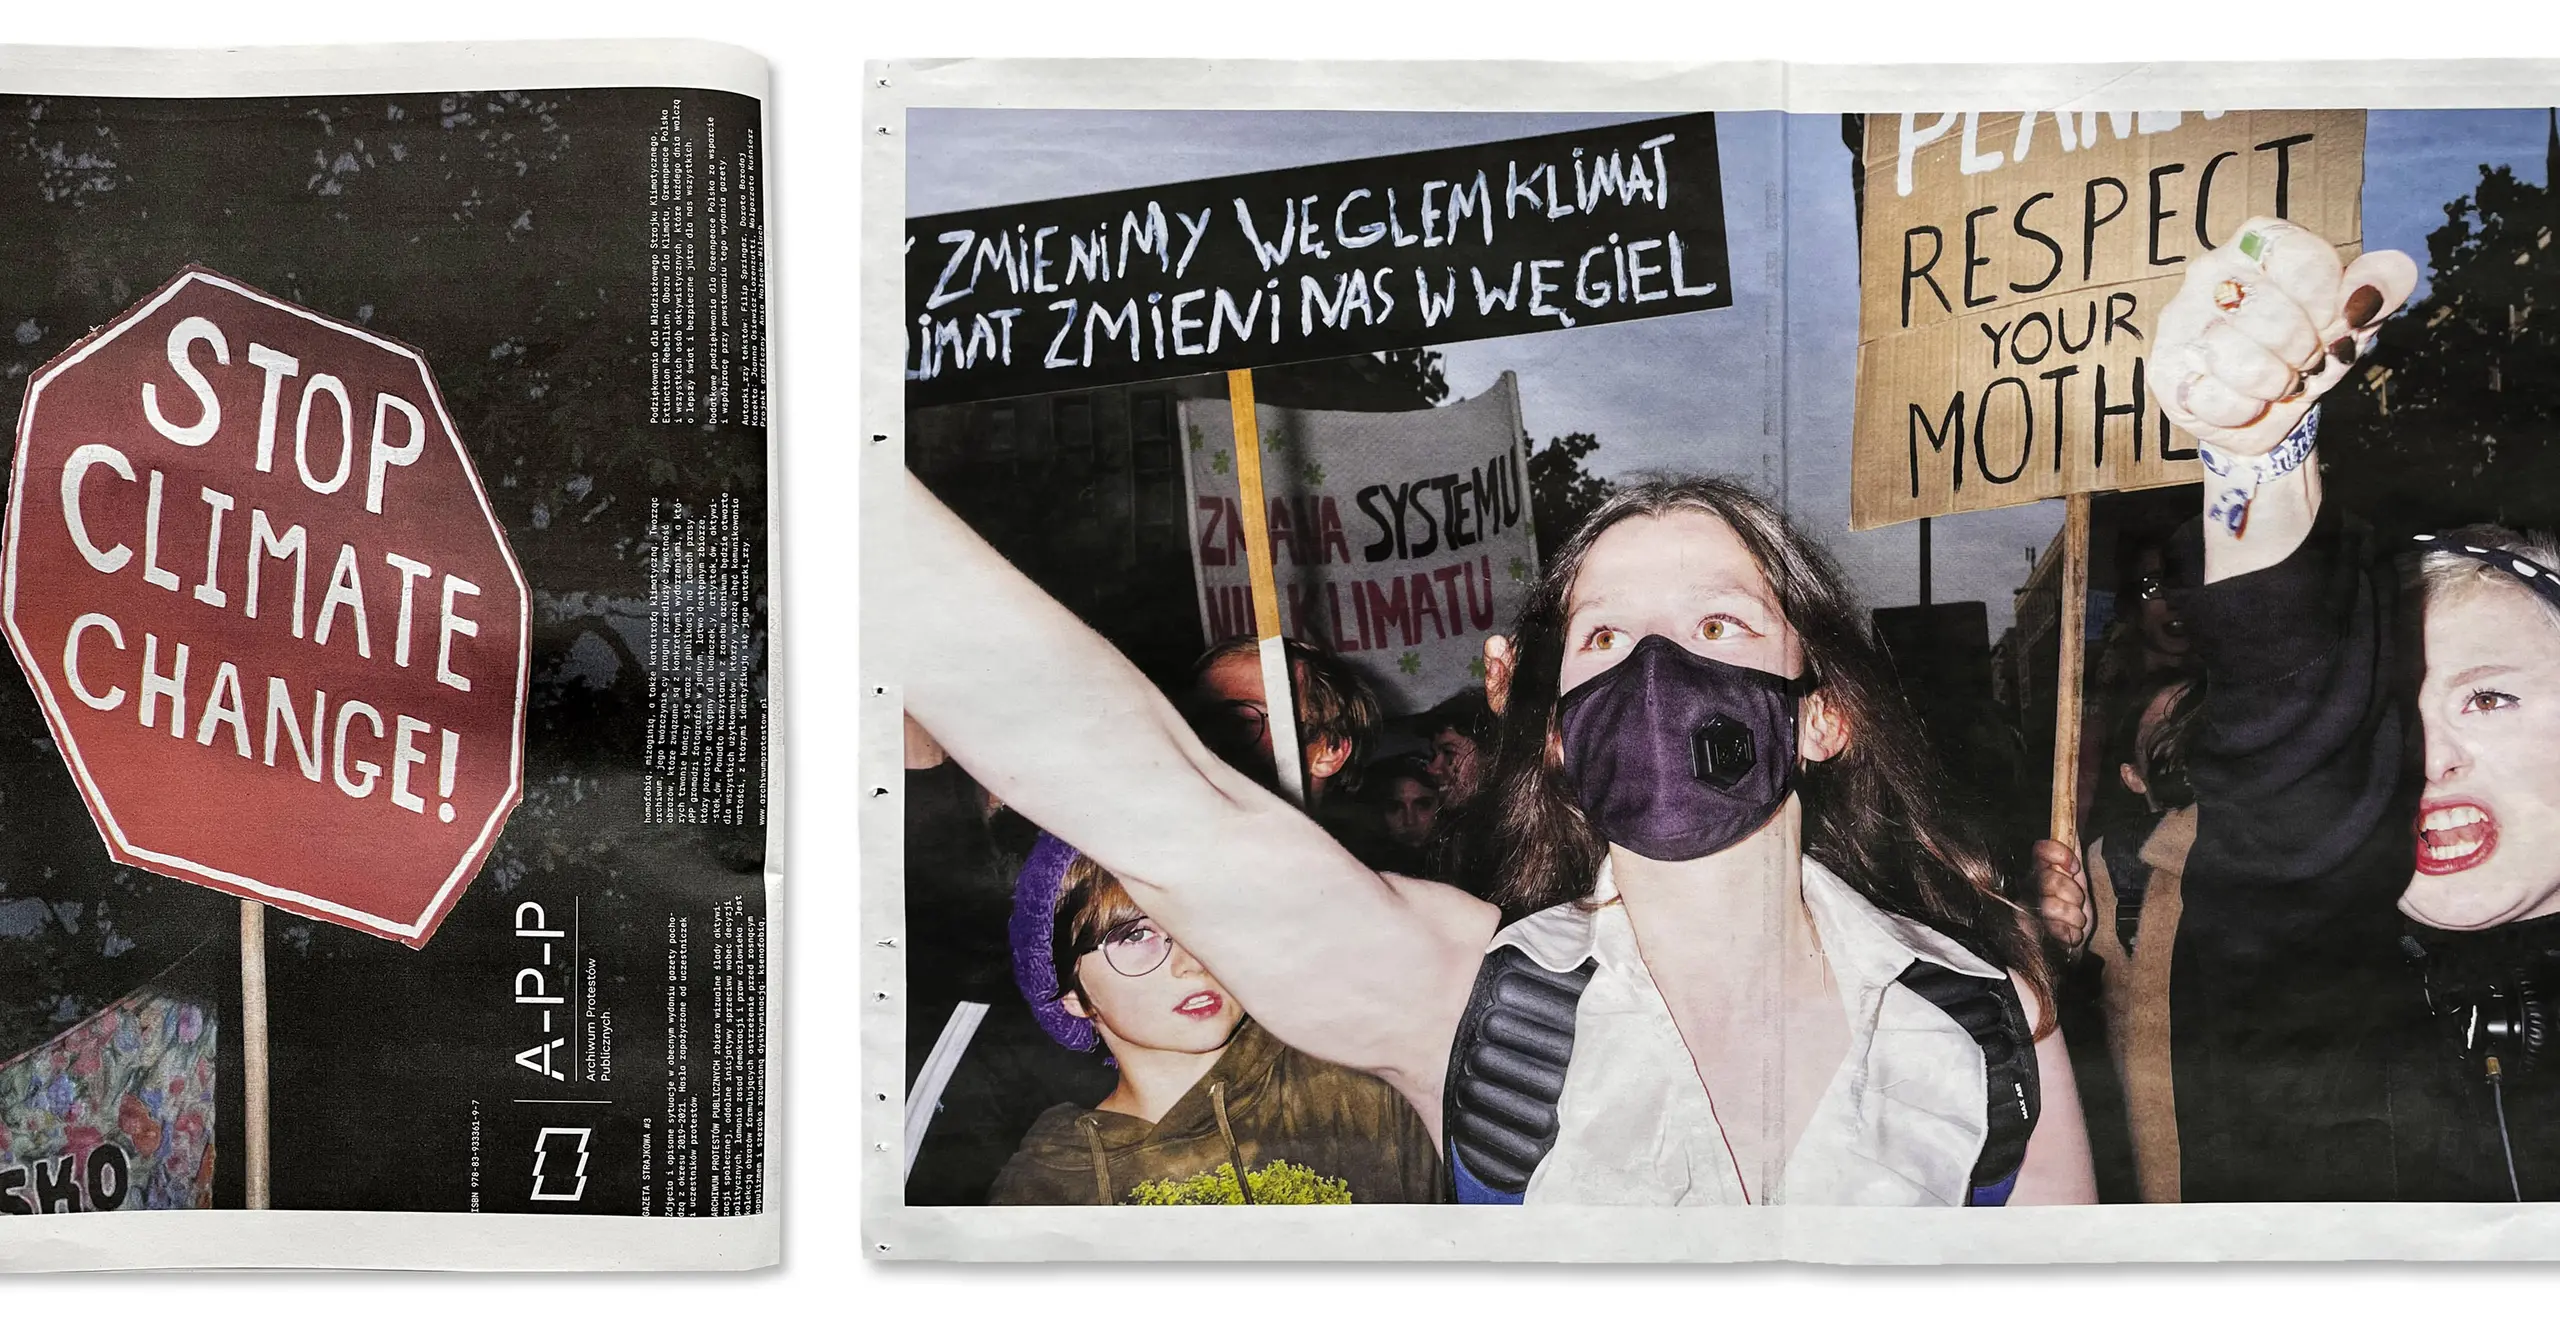 Newspaper scans showing a sign and people protesting. 